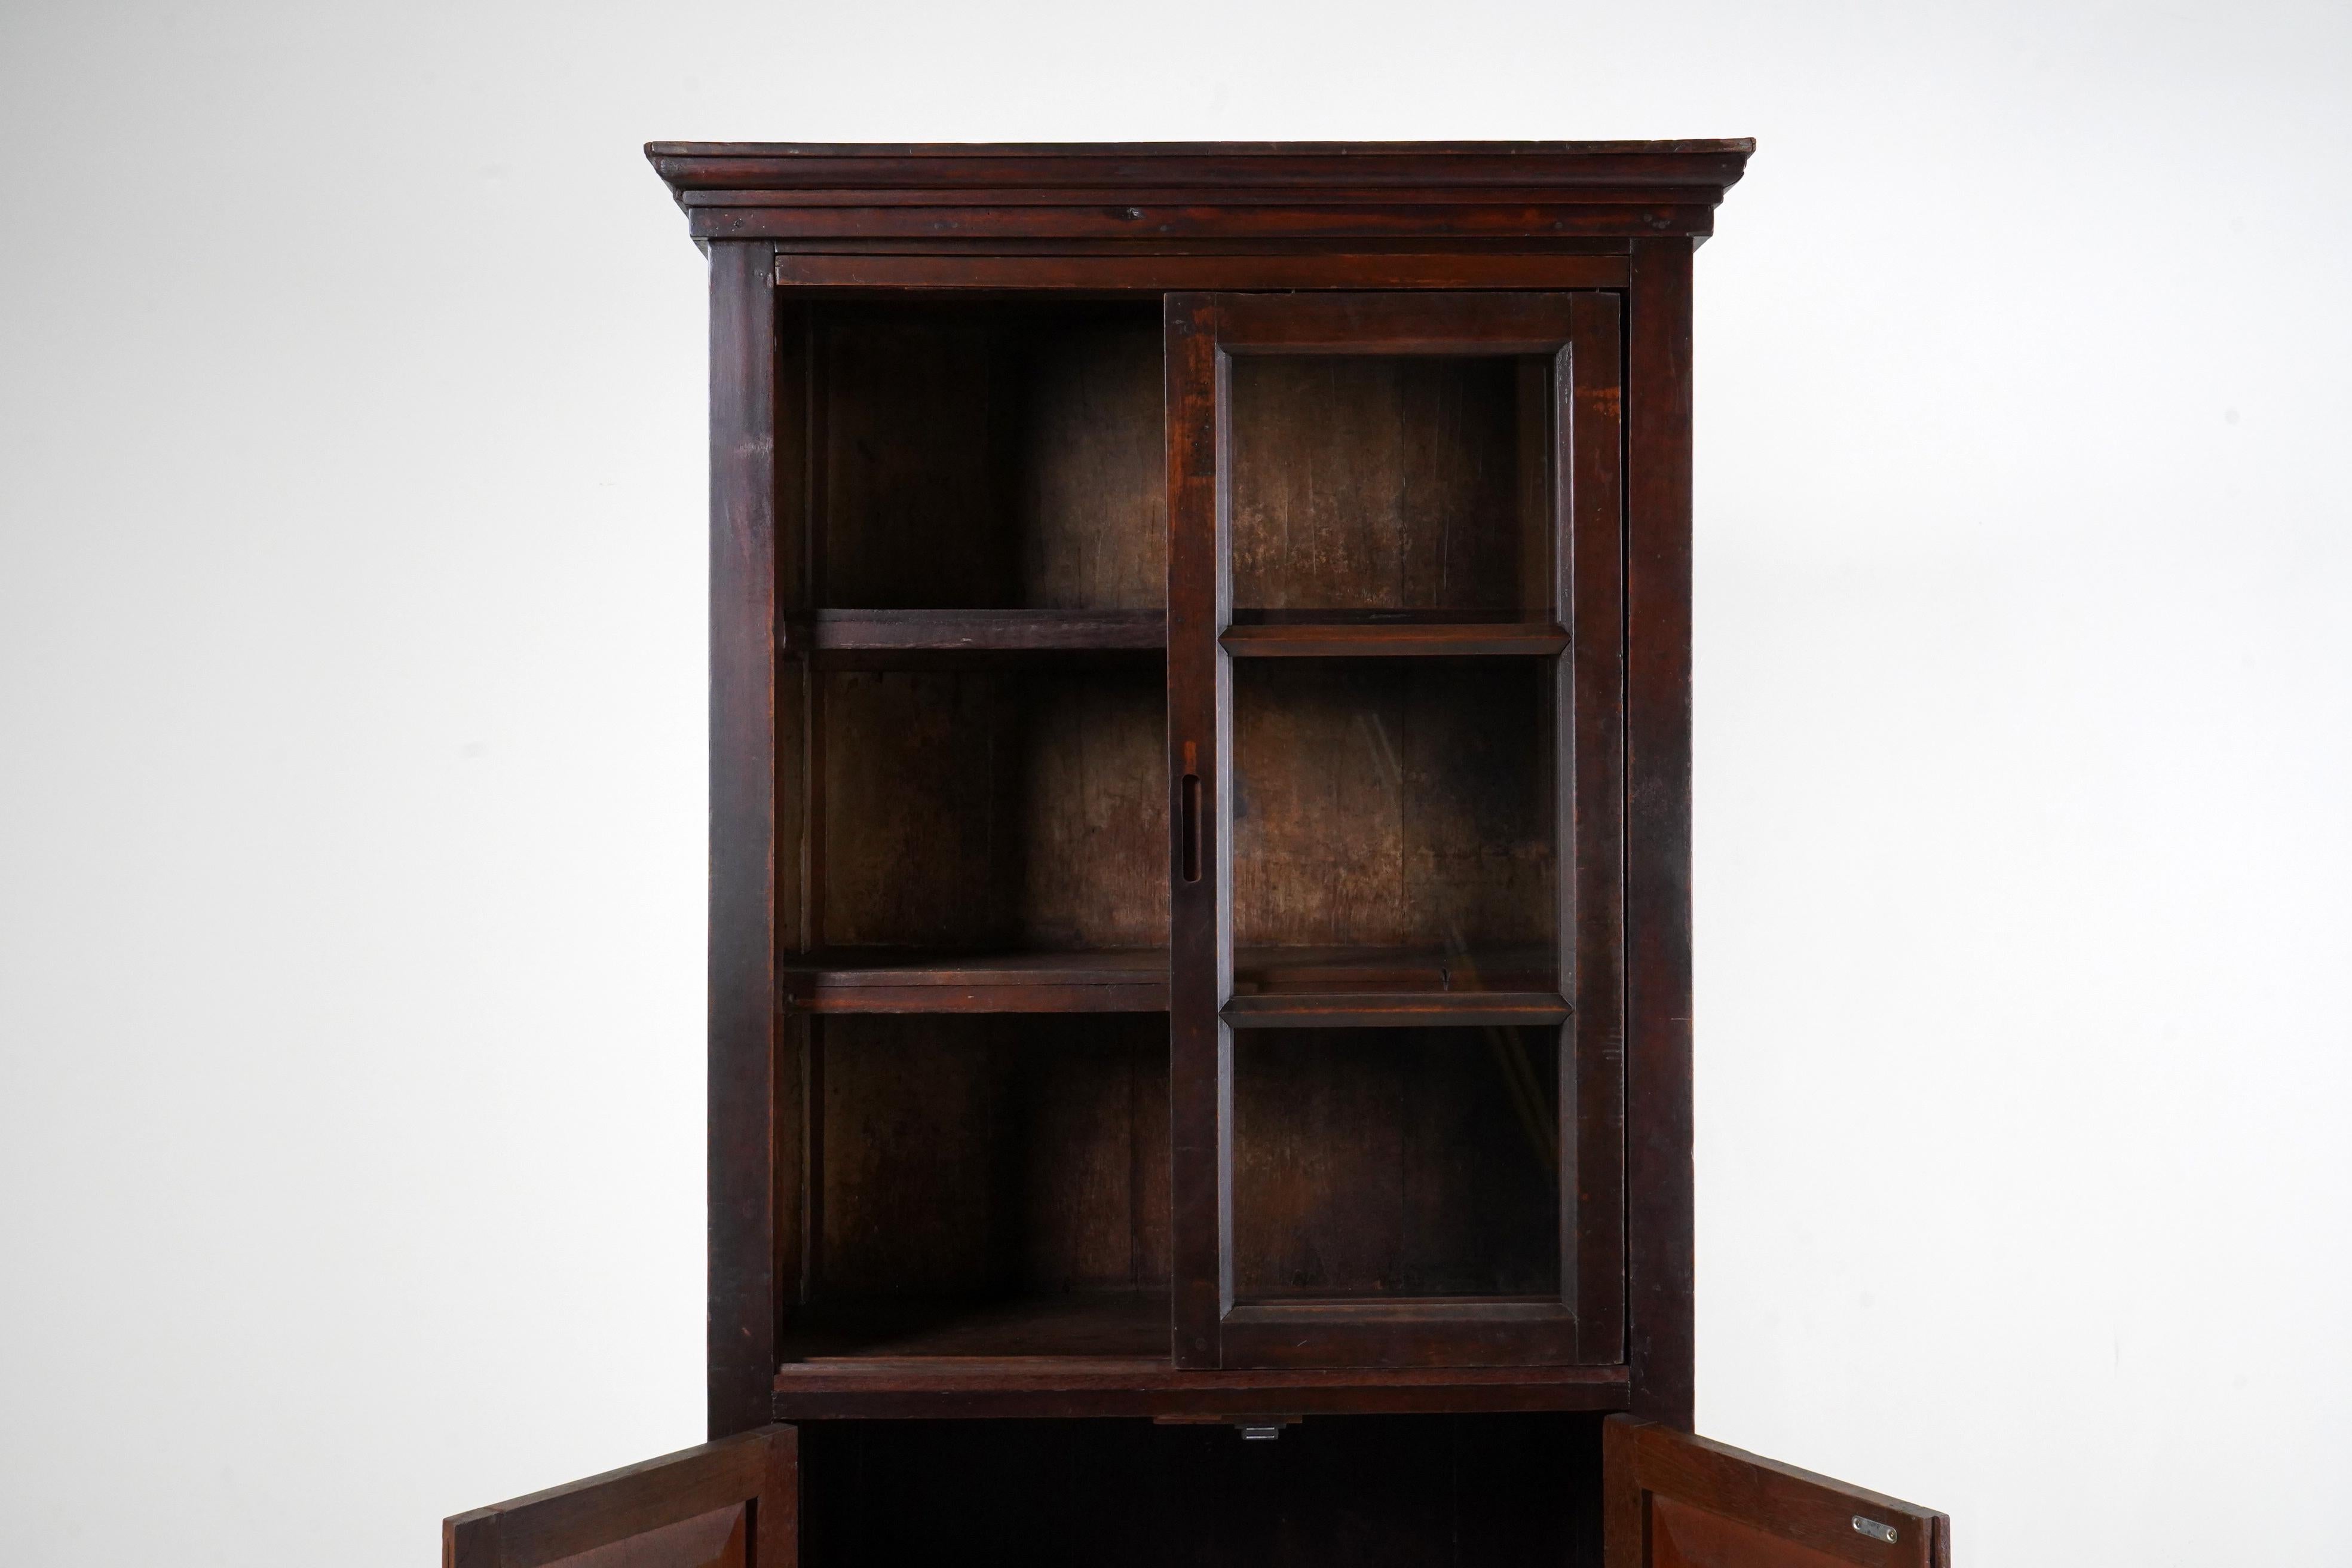 A British Colonial Teak Wood  Book Cabinet  3